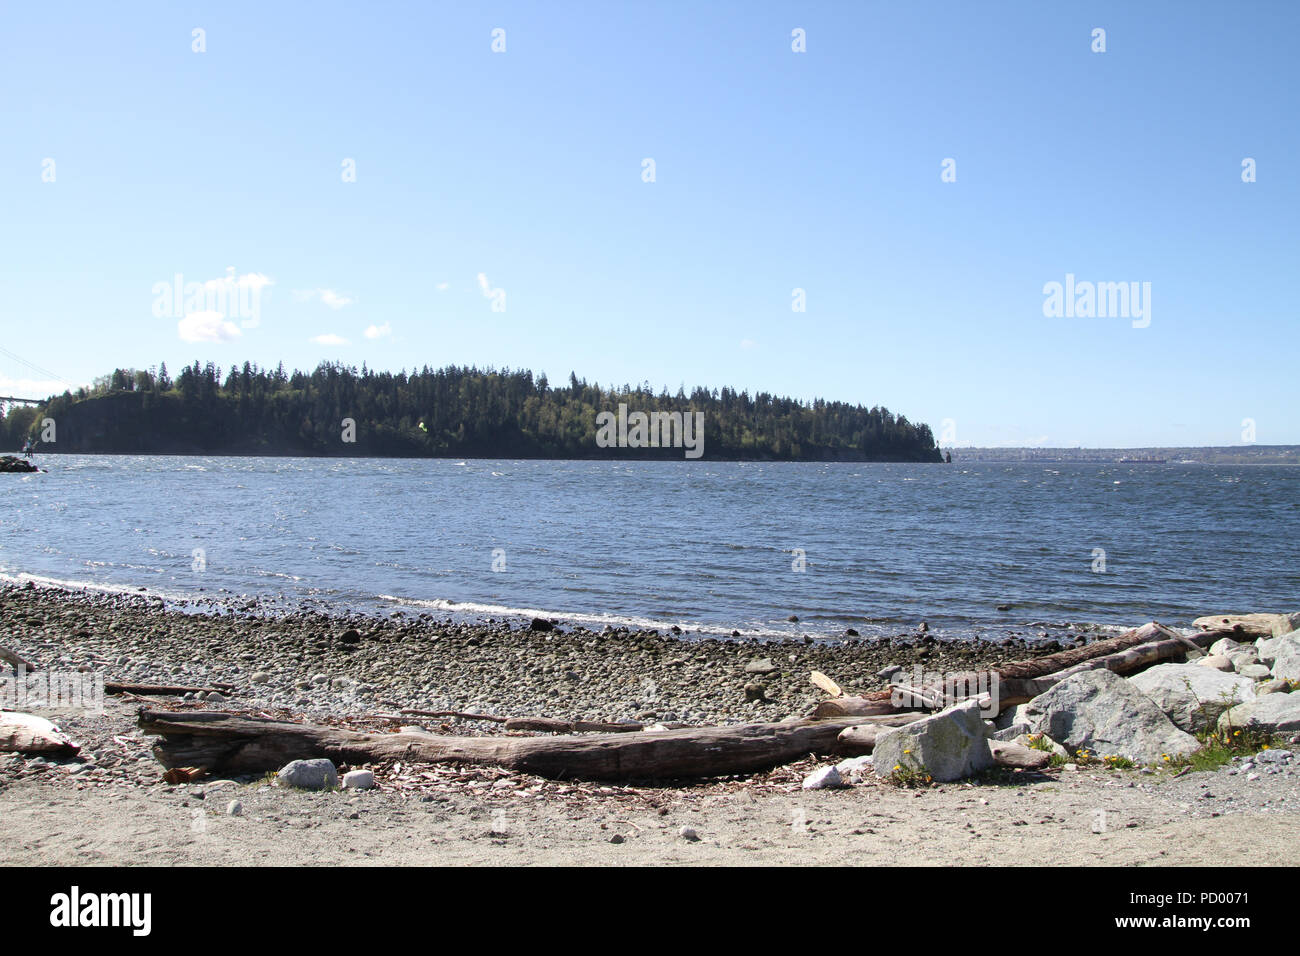 A beach on the edge of a bay looking across the water to a treed land mass.  There are logs and driftwood located on the beach. Stock Photo